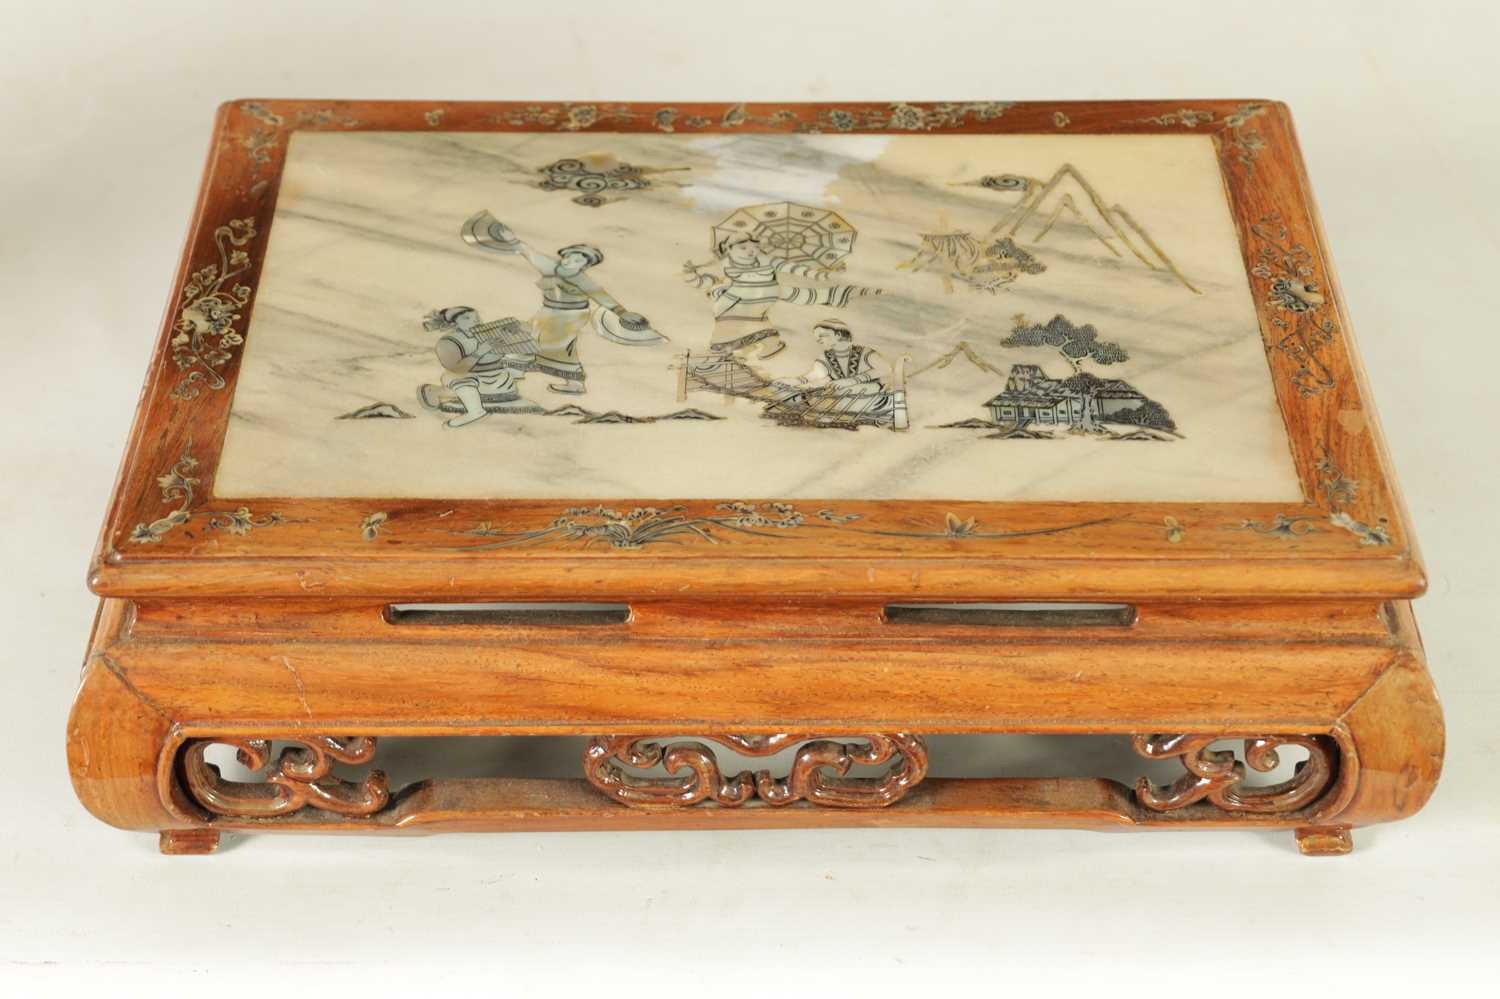 A 20TH-CENTURY CHINESE HARDWOOD MOTHER OF PEARL INLAID MARBLE-TOPPED STAND - Image 2 of 9